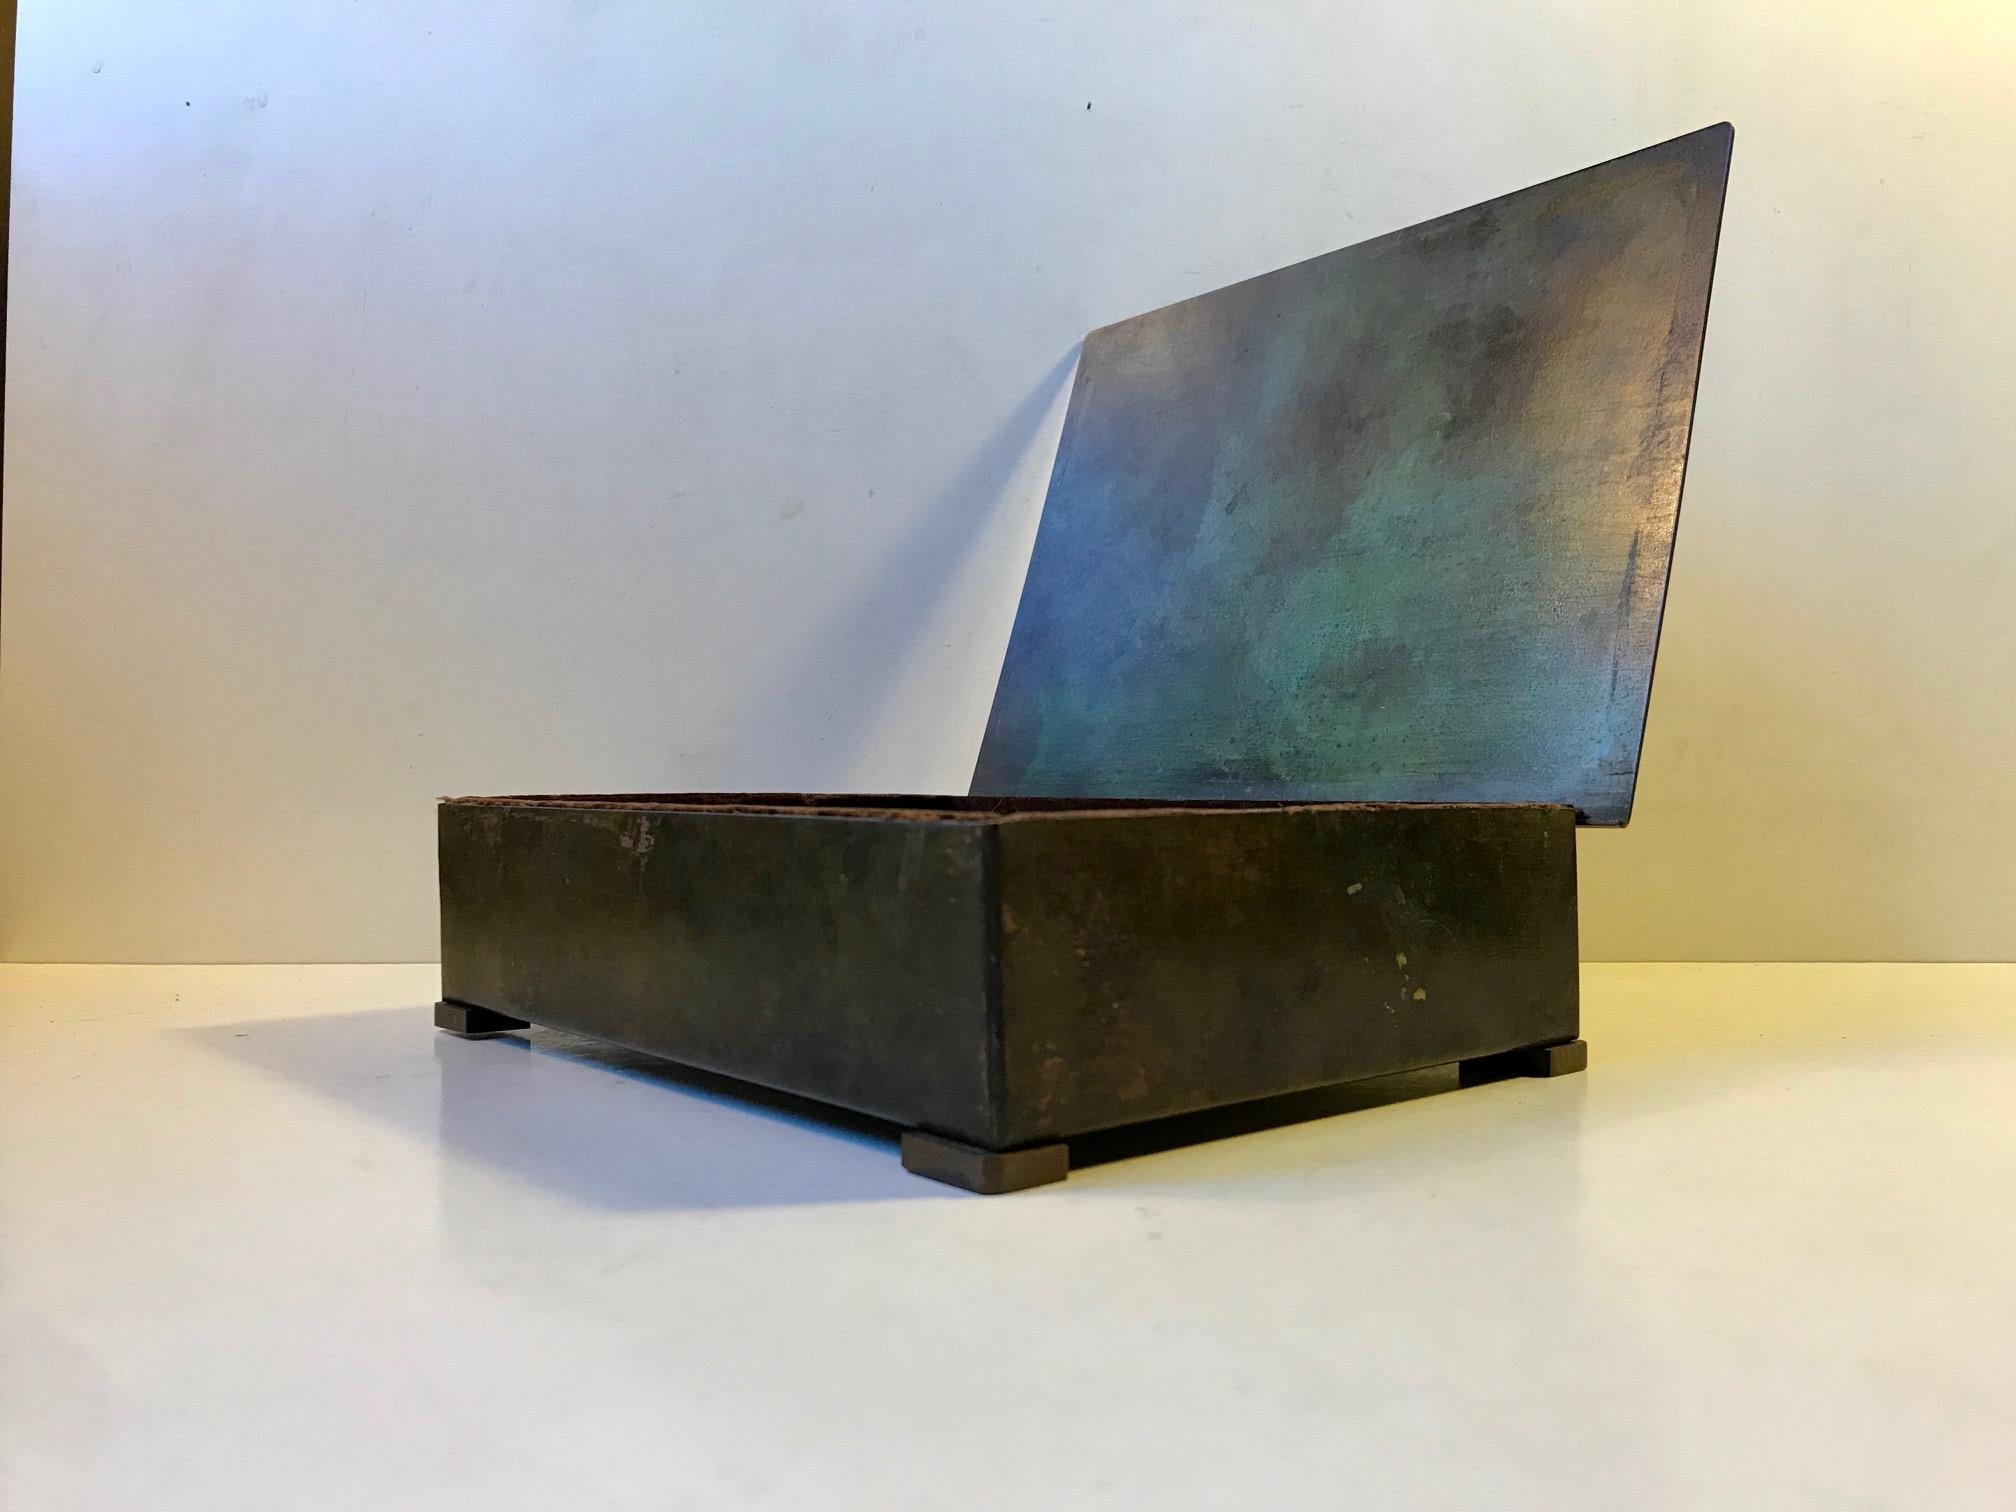 - Art Deco Jewelry box
- Strict and clean architectural lines - no motif
- It was designed by Holger Fridericias for his own company HF 
- Produced in Denmark during the 1930s.
- Made of verdigris treated bronze.
- Lined with brown velour -